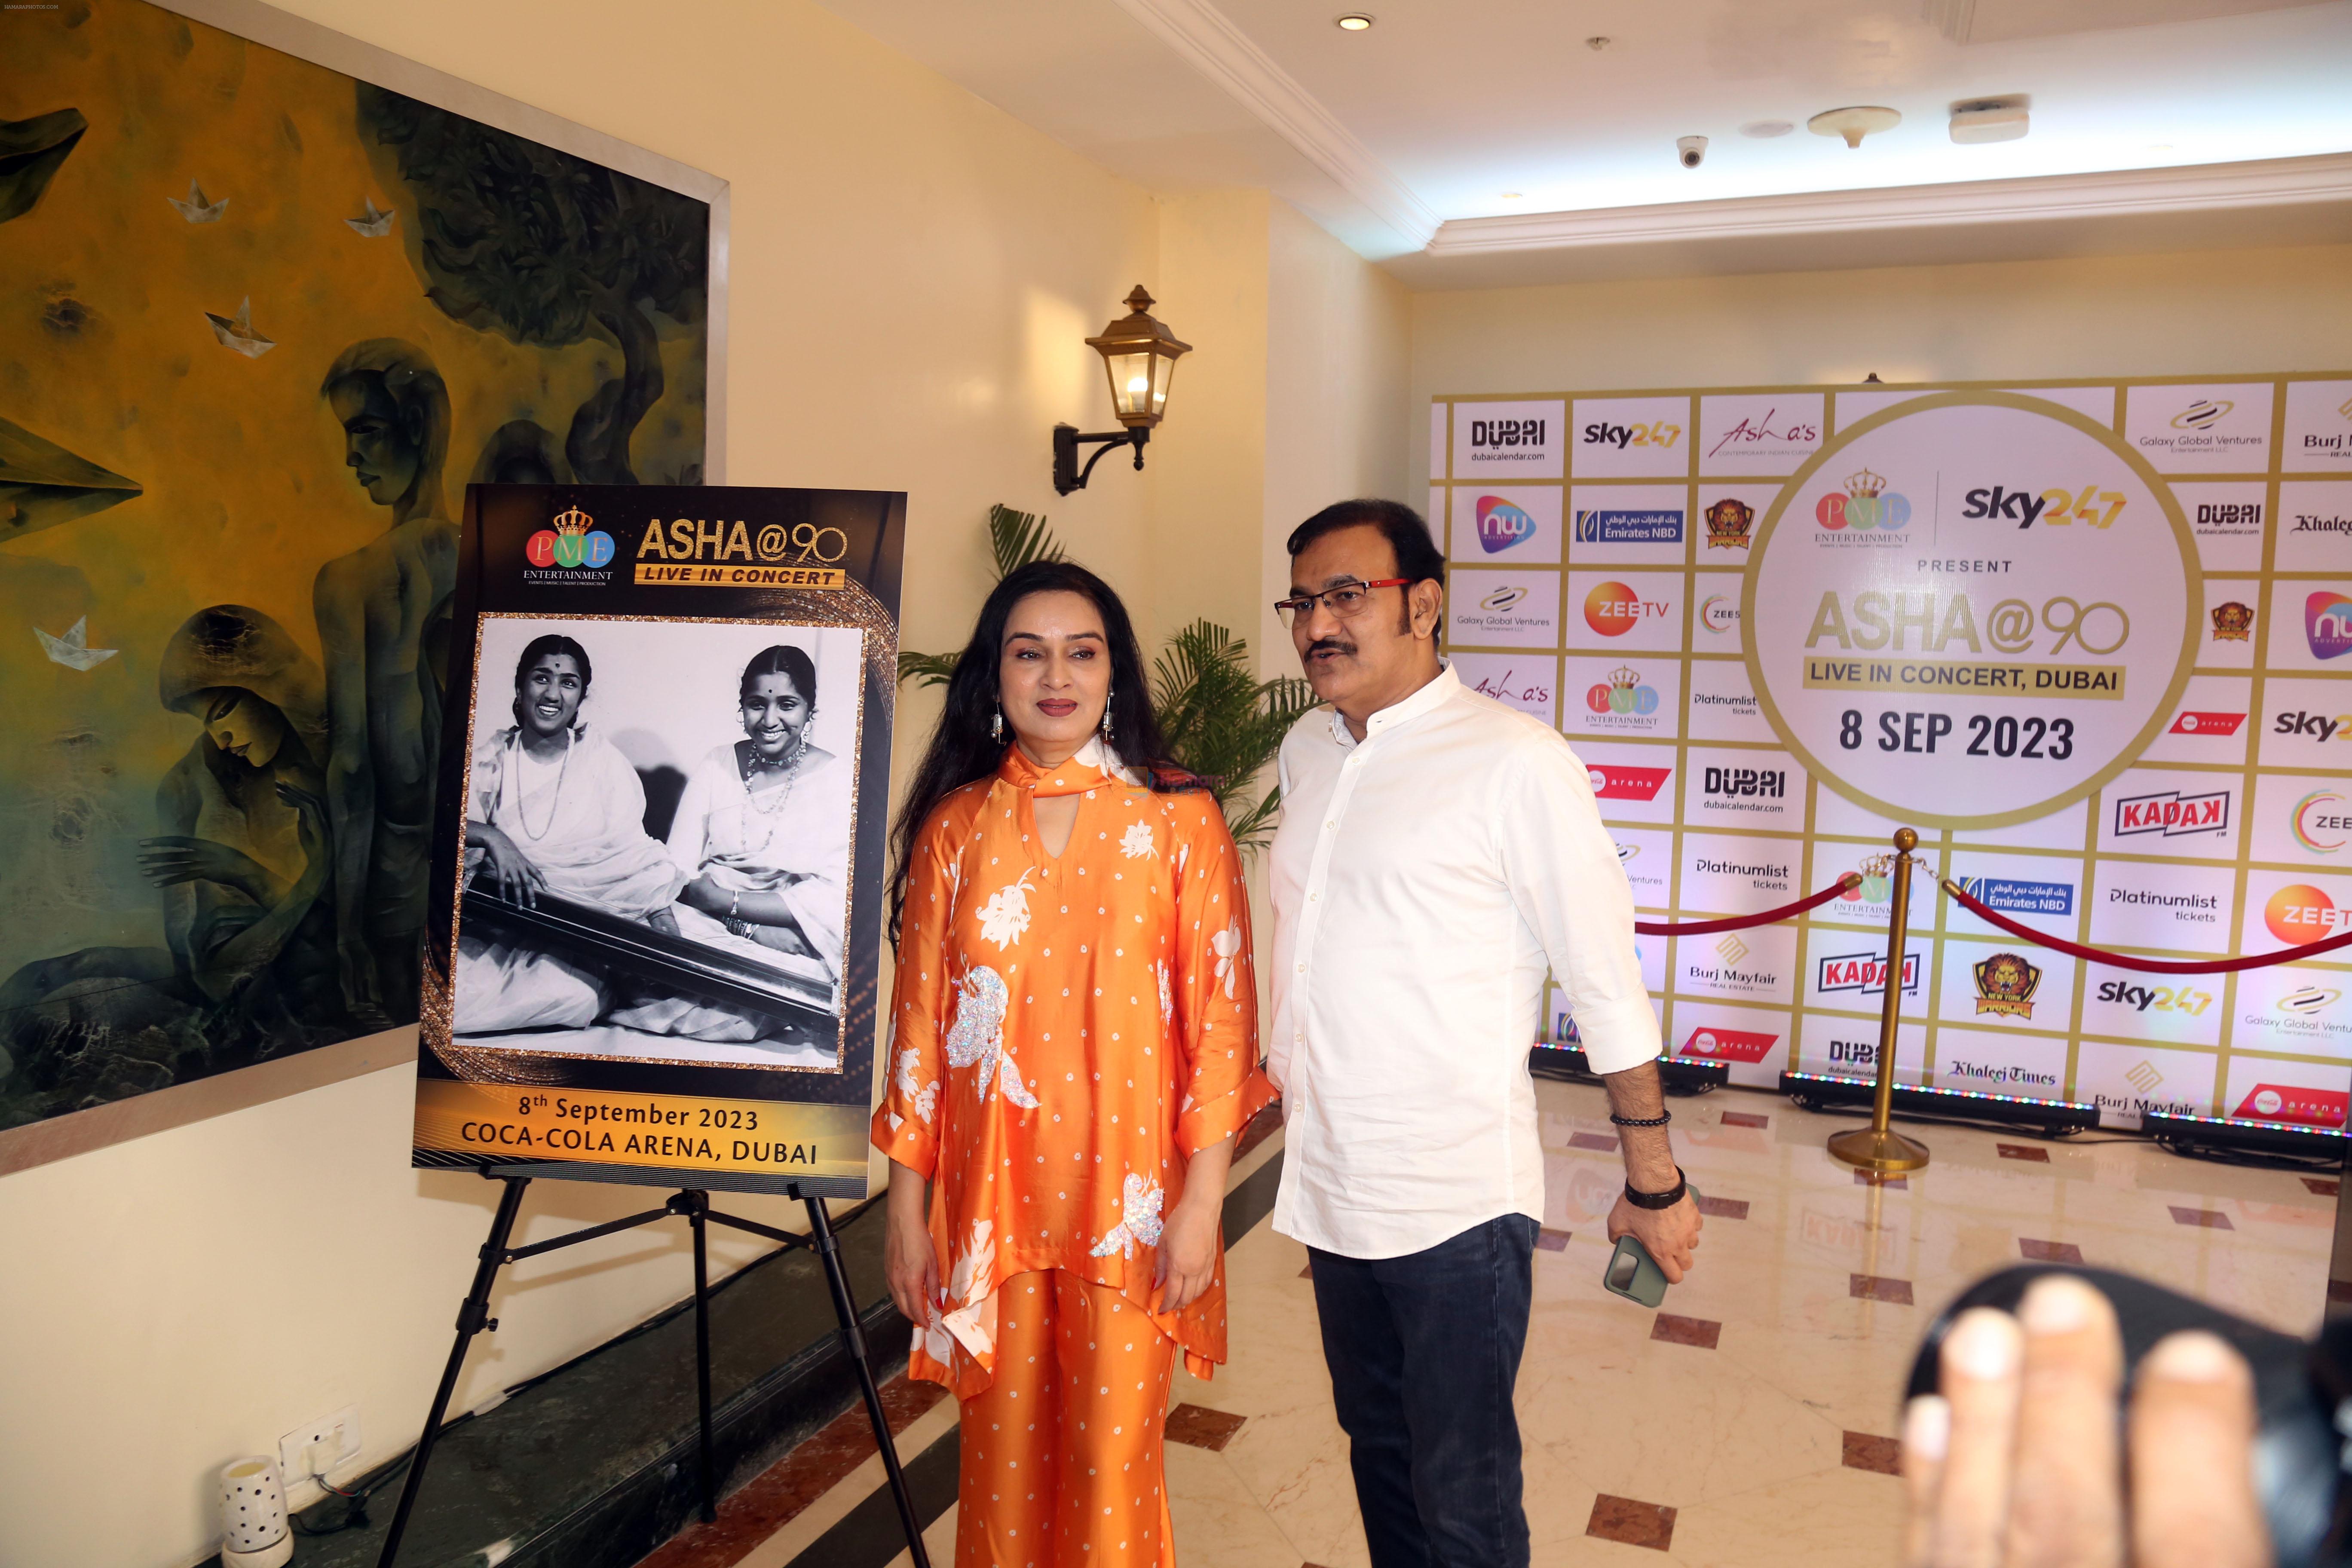 Padmini Kolhapure, Sudesh Bhosale at the Press Conference for Asha@90 Live In Concert in Dubai on 8th August 2023